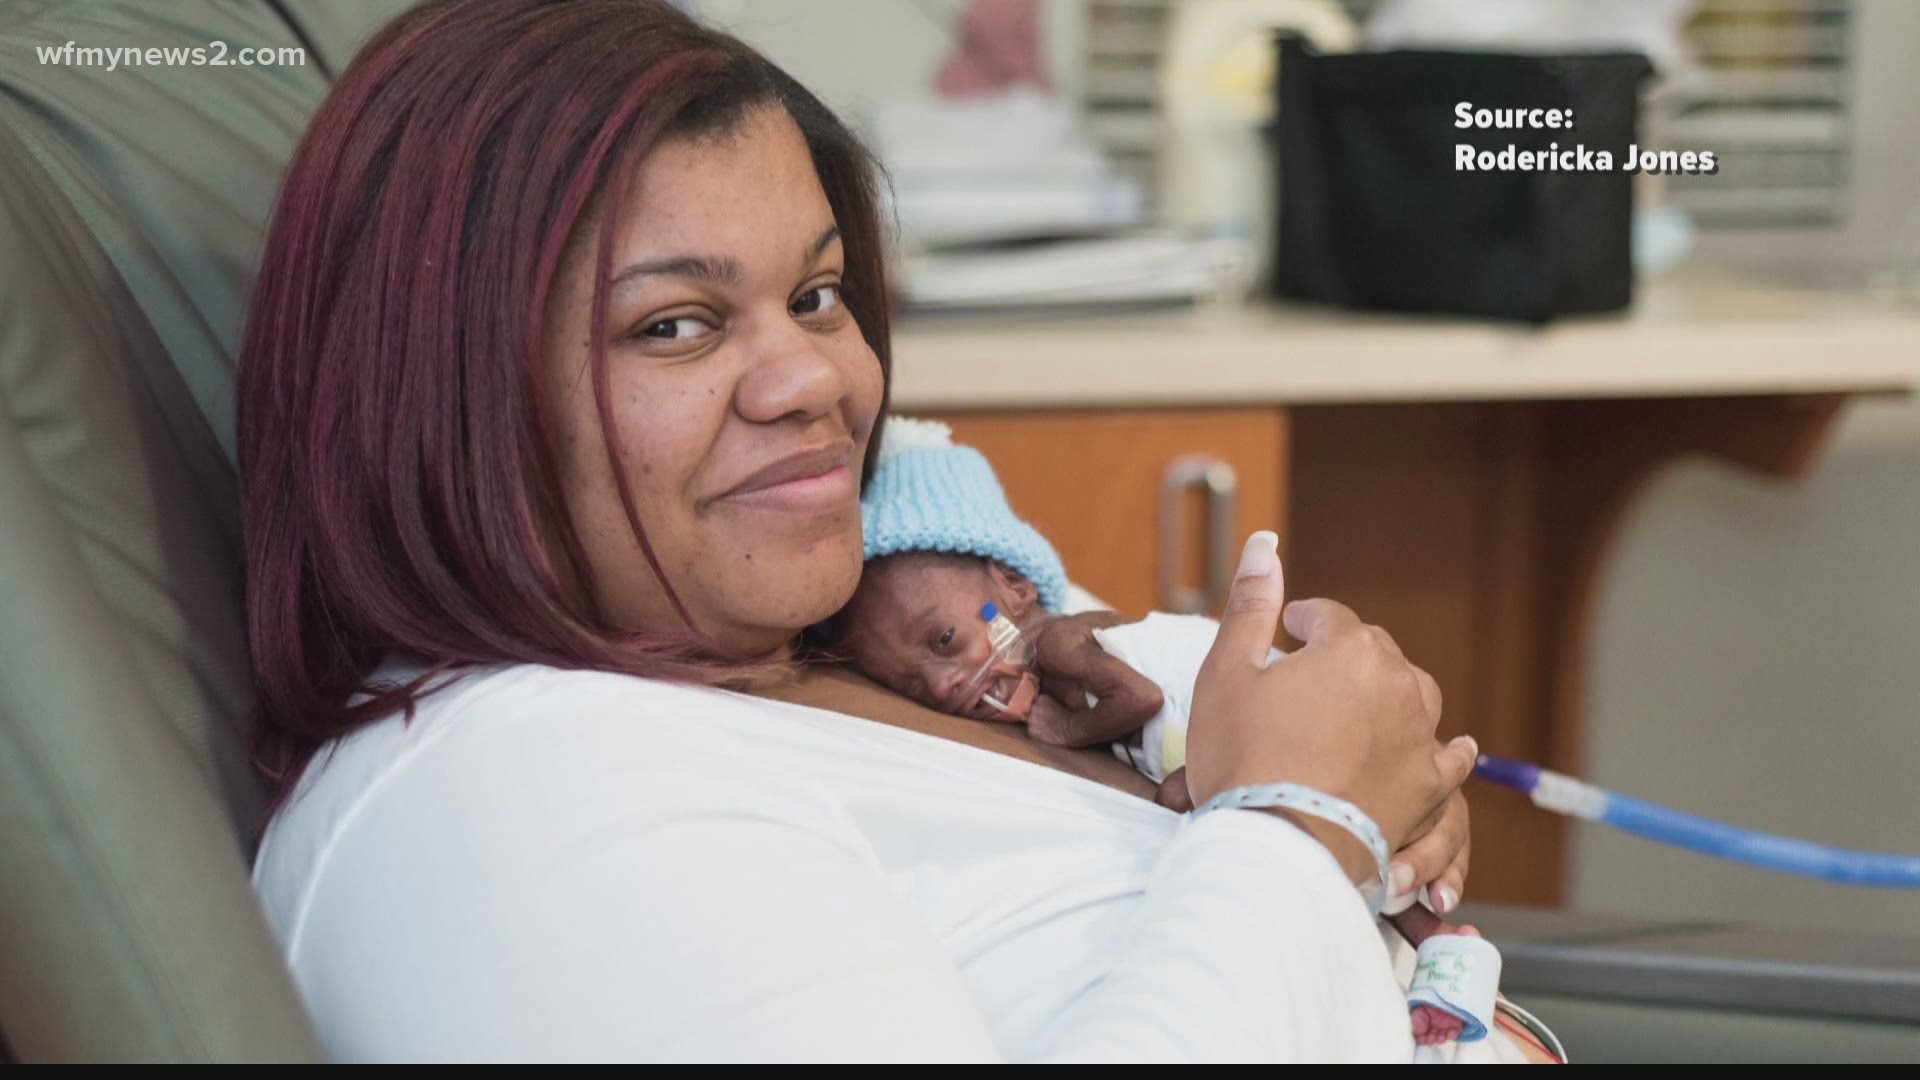 Amari Jones was born nearly four months early and weighed 15 ounces. Doctors call this type of birth a micro-preemie.